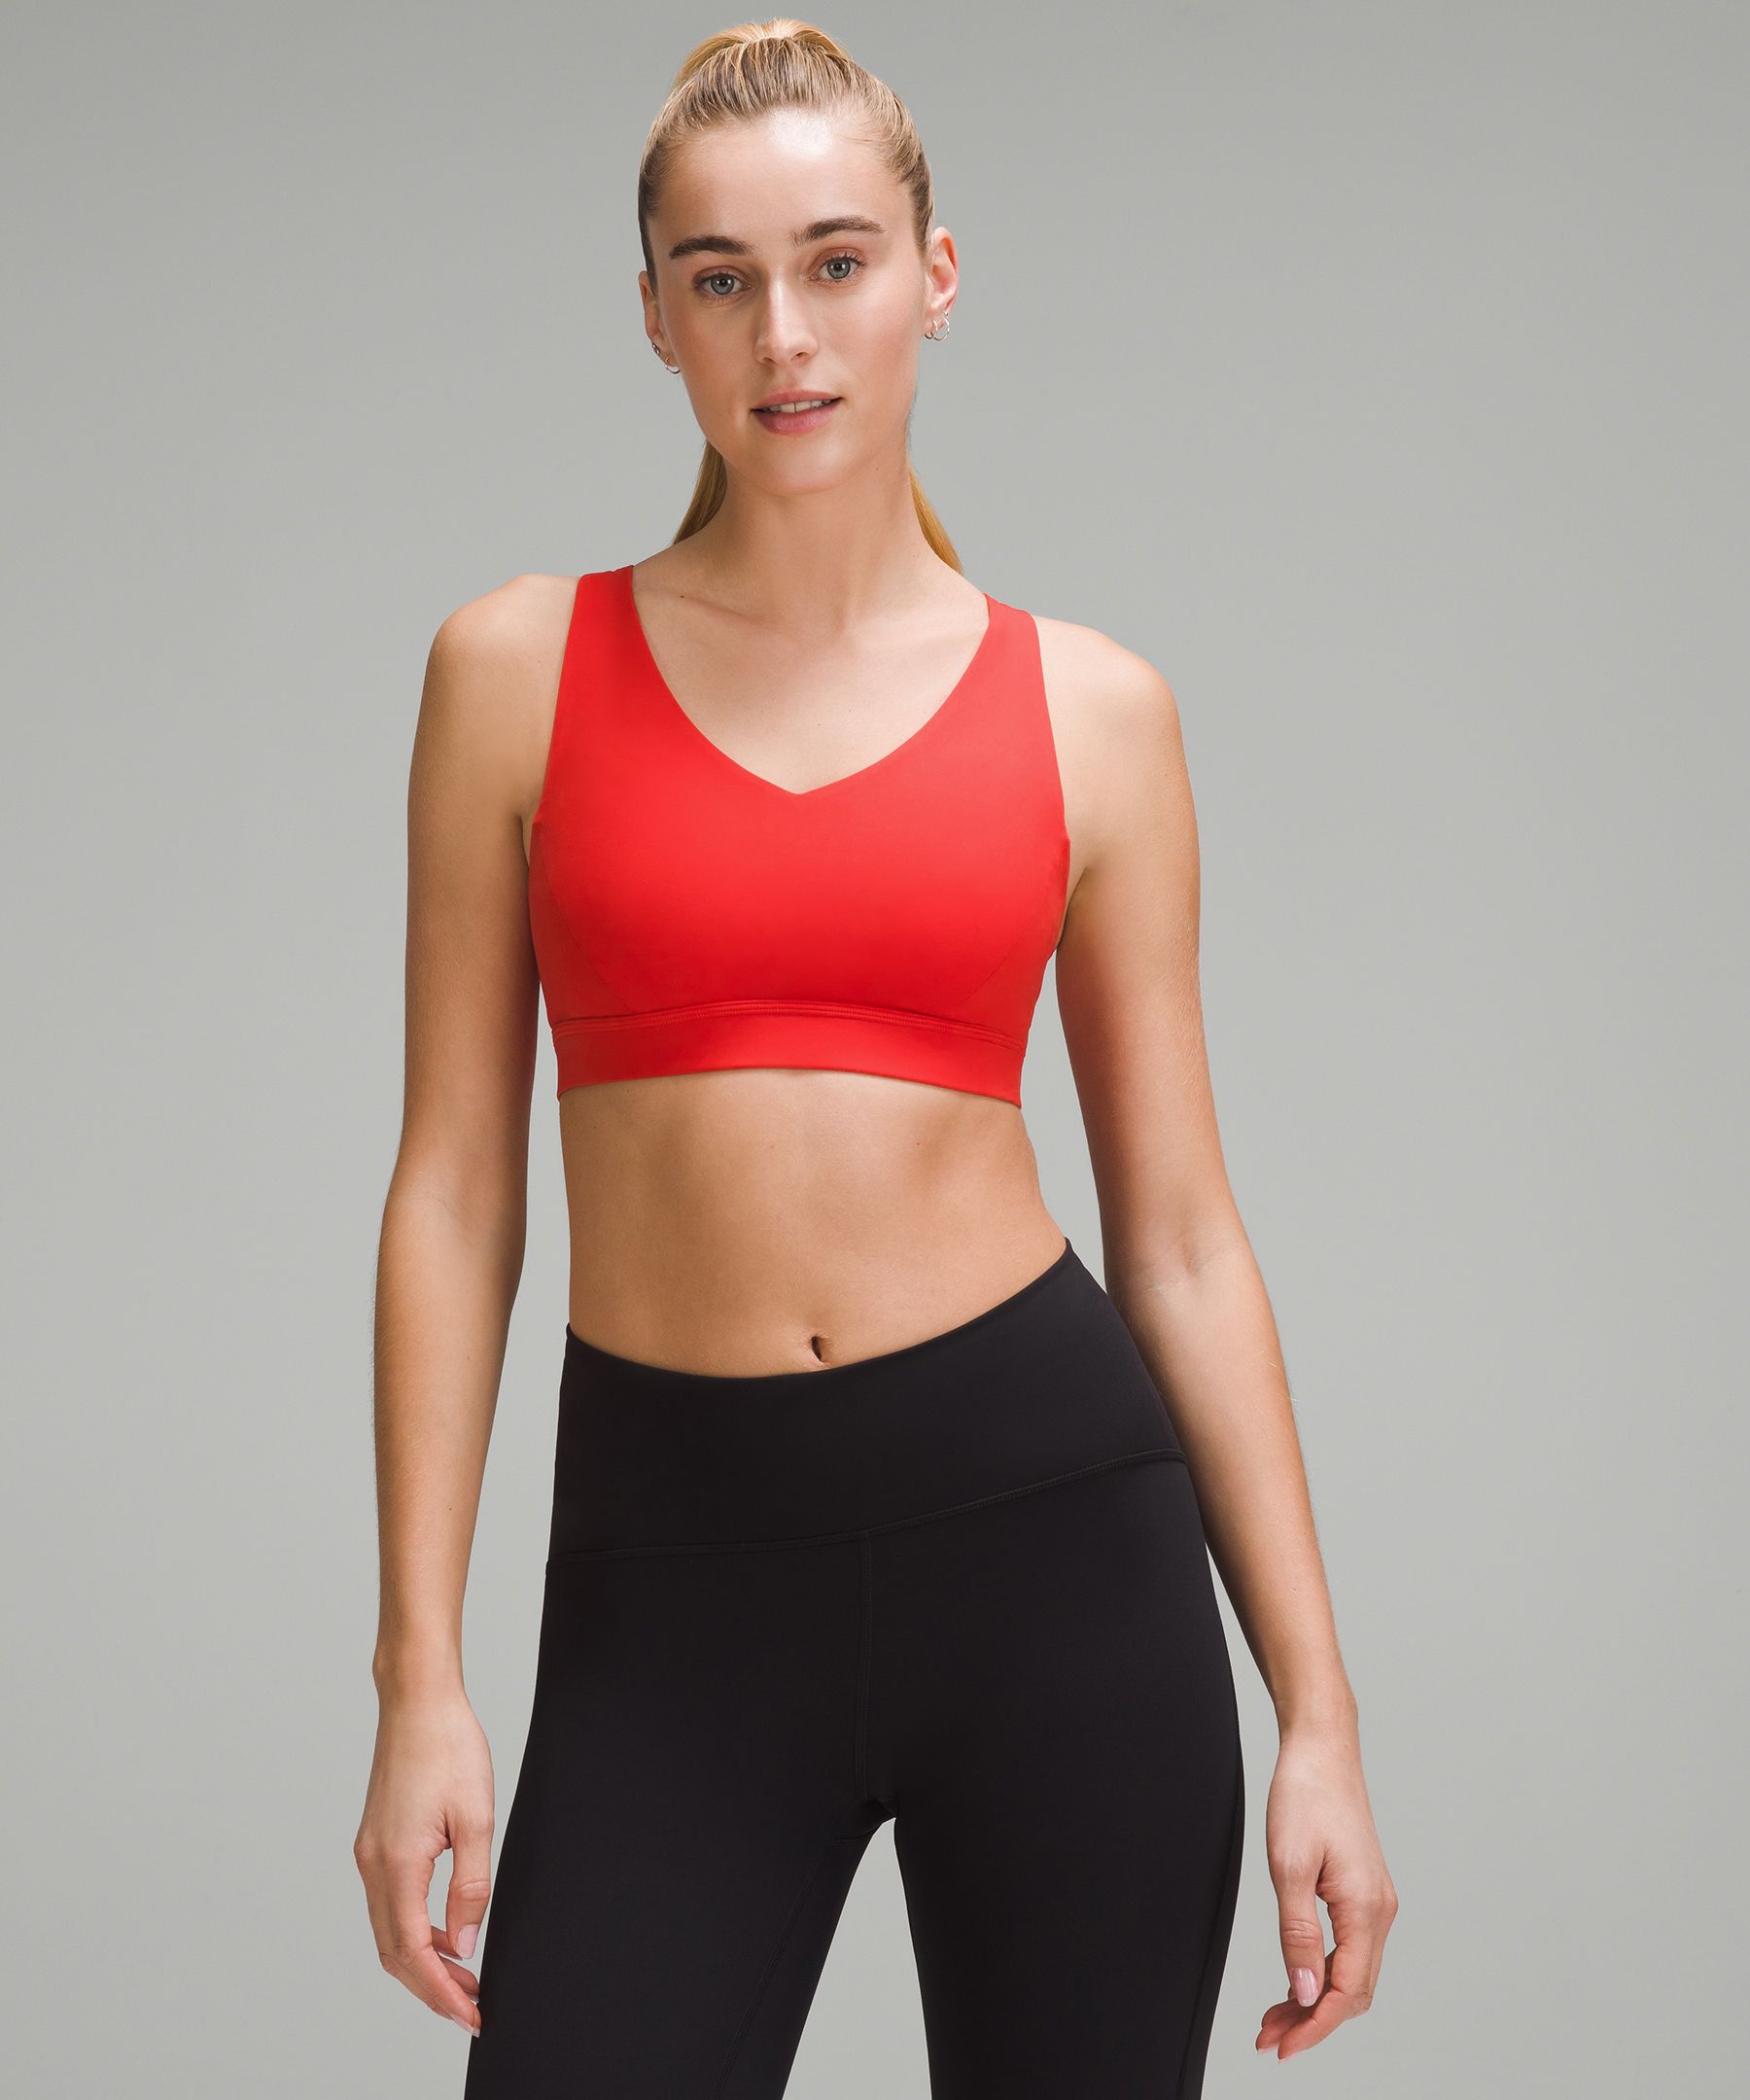 Lululemon Sports Bra Green Size 34 A - $23 (53% Off Retail) - From nicole